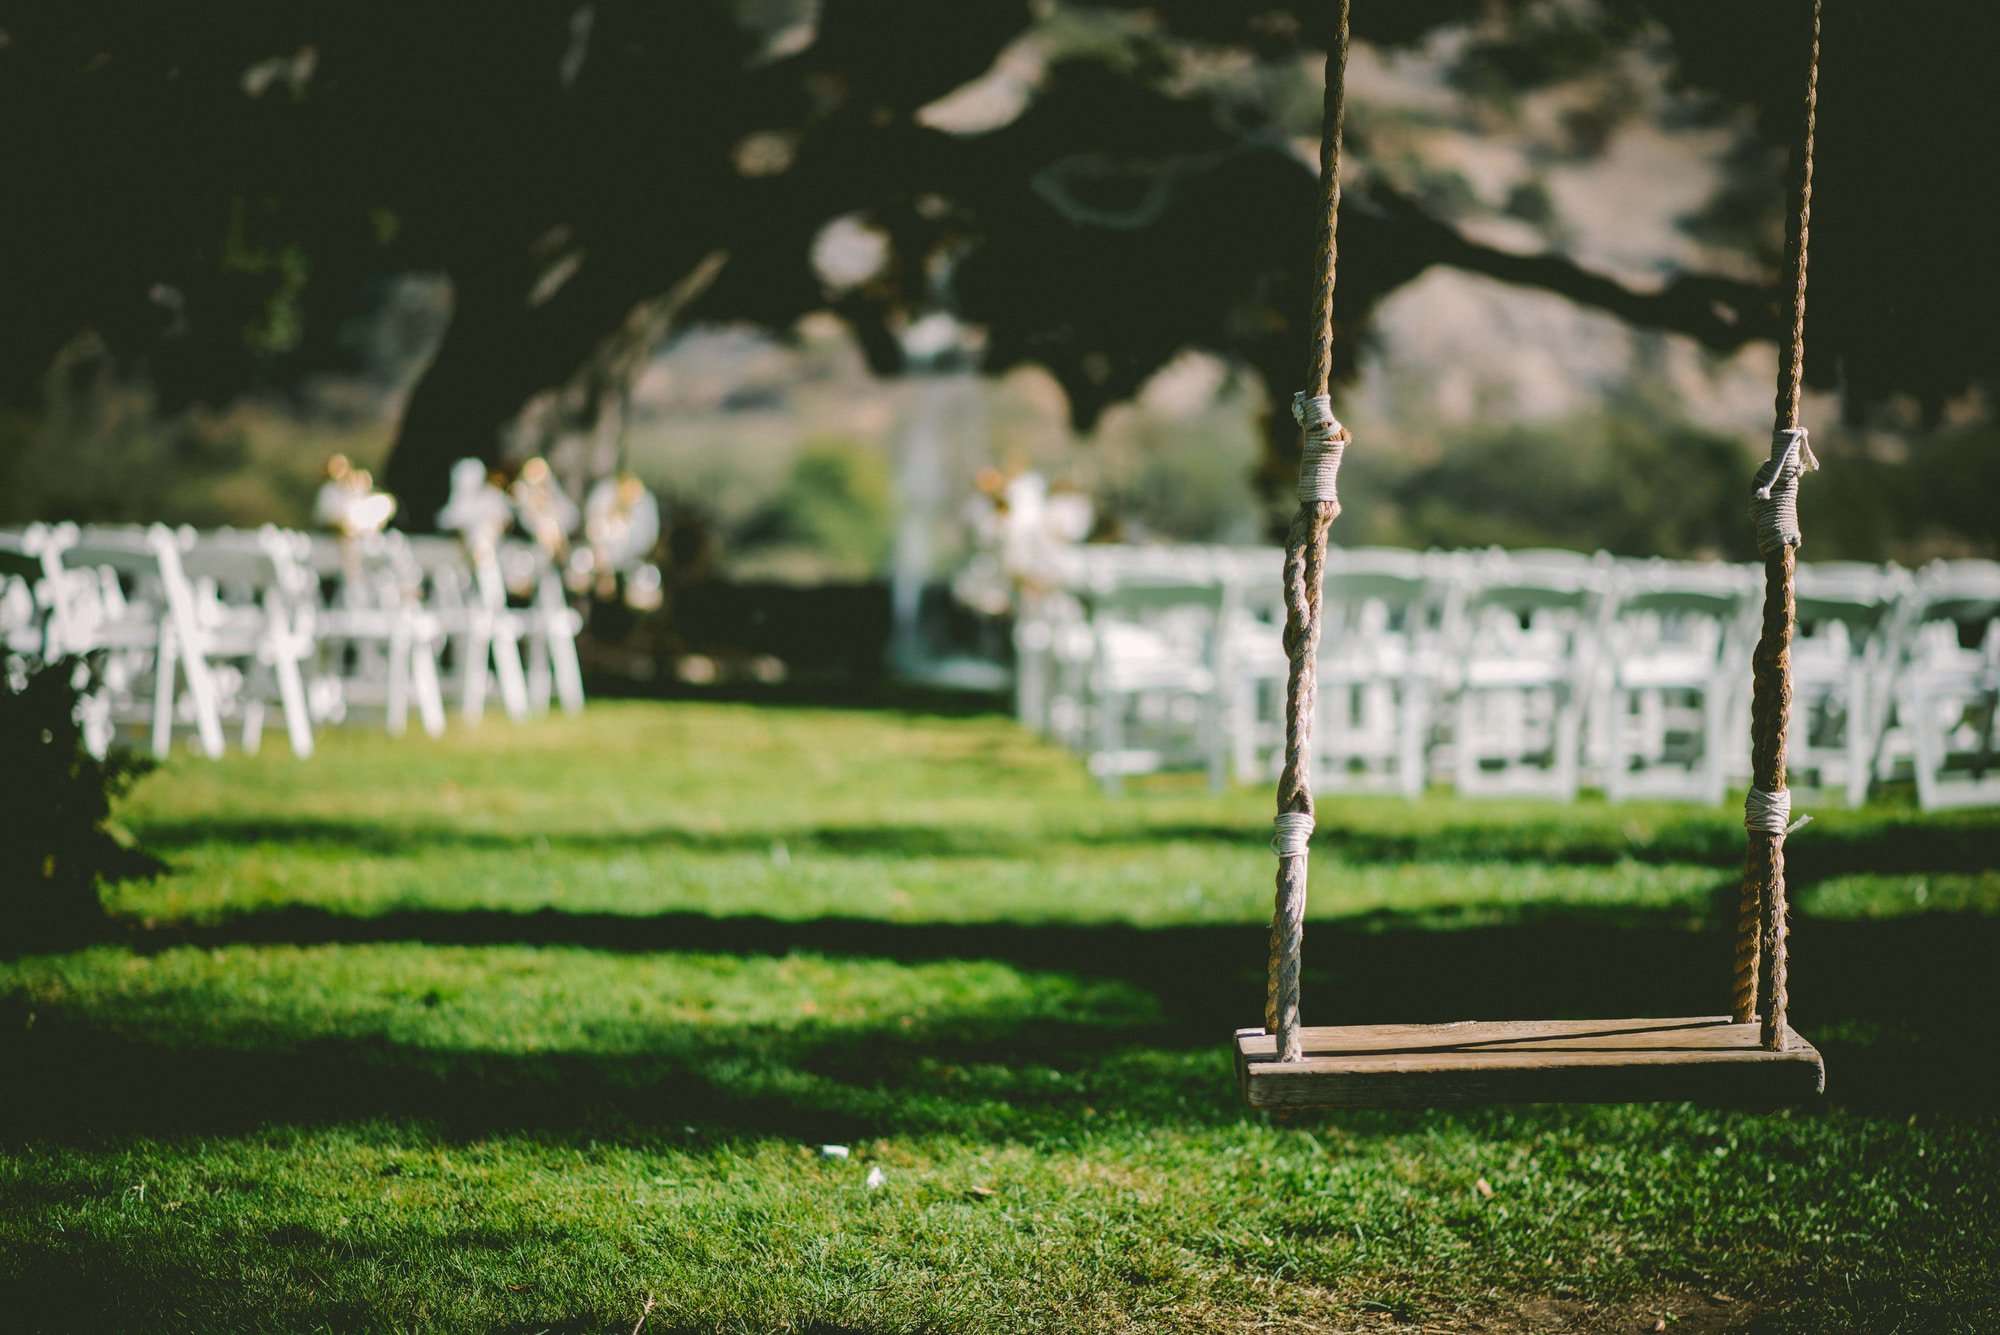 Closeup Photo Of Brown Wooden Swing During Daytime 756a83338c044b7b1f2773e52e6d3d48 2000Catering for Your At-Home Reception